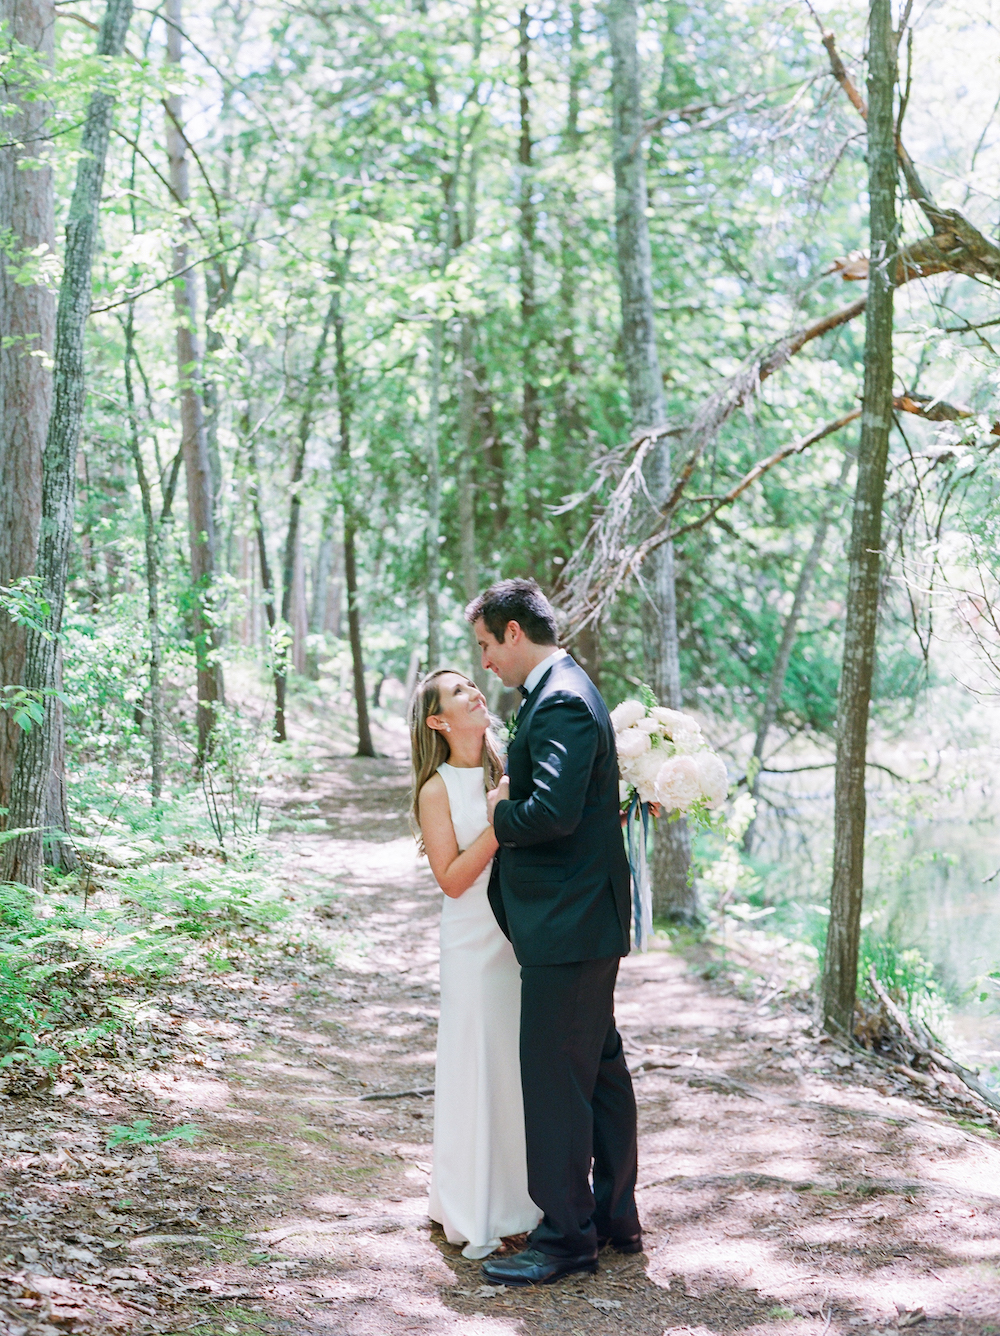 A bride and a groom in the woods on their wedding day